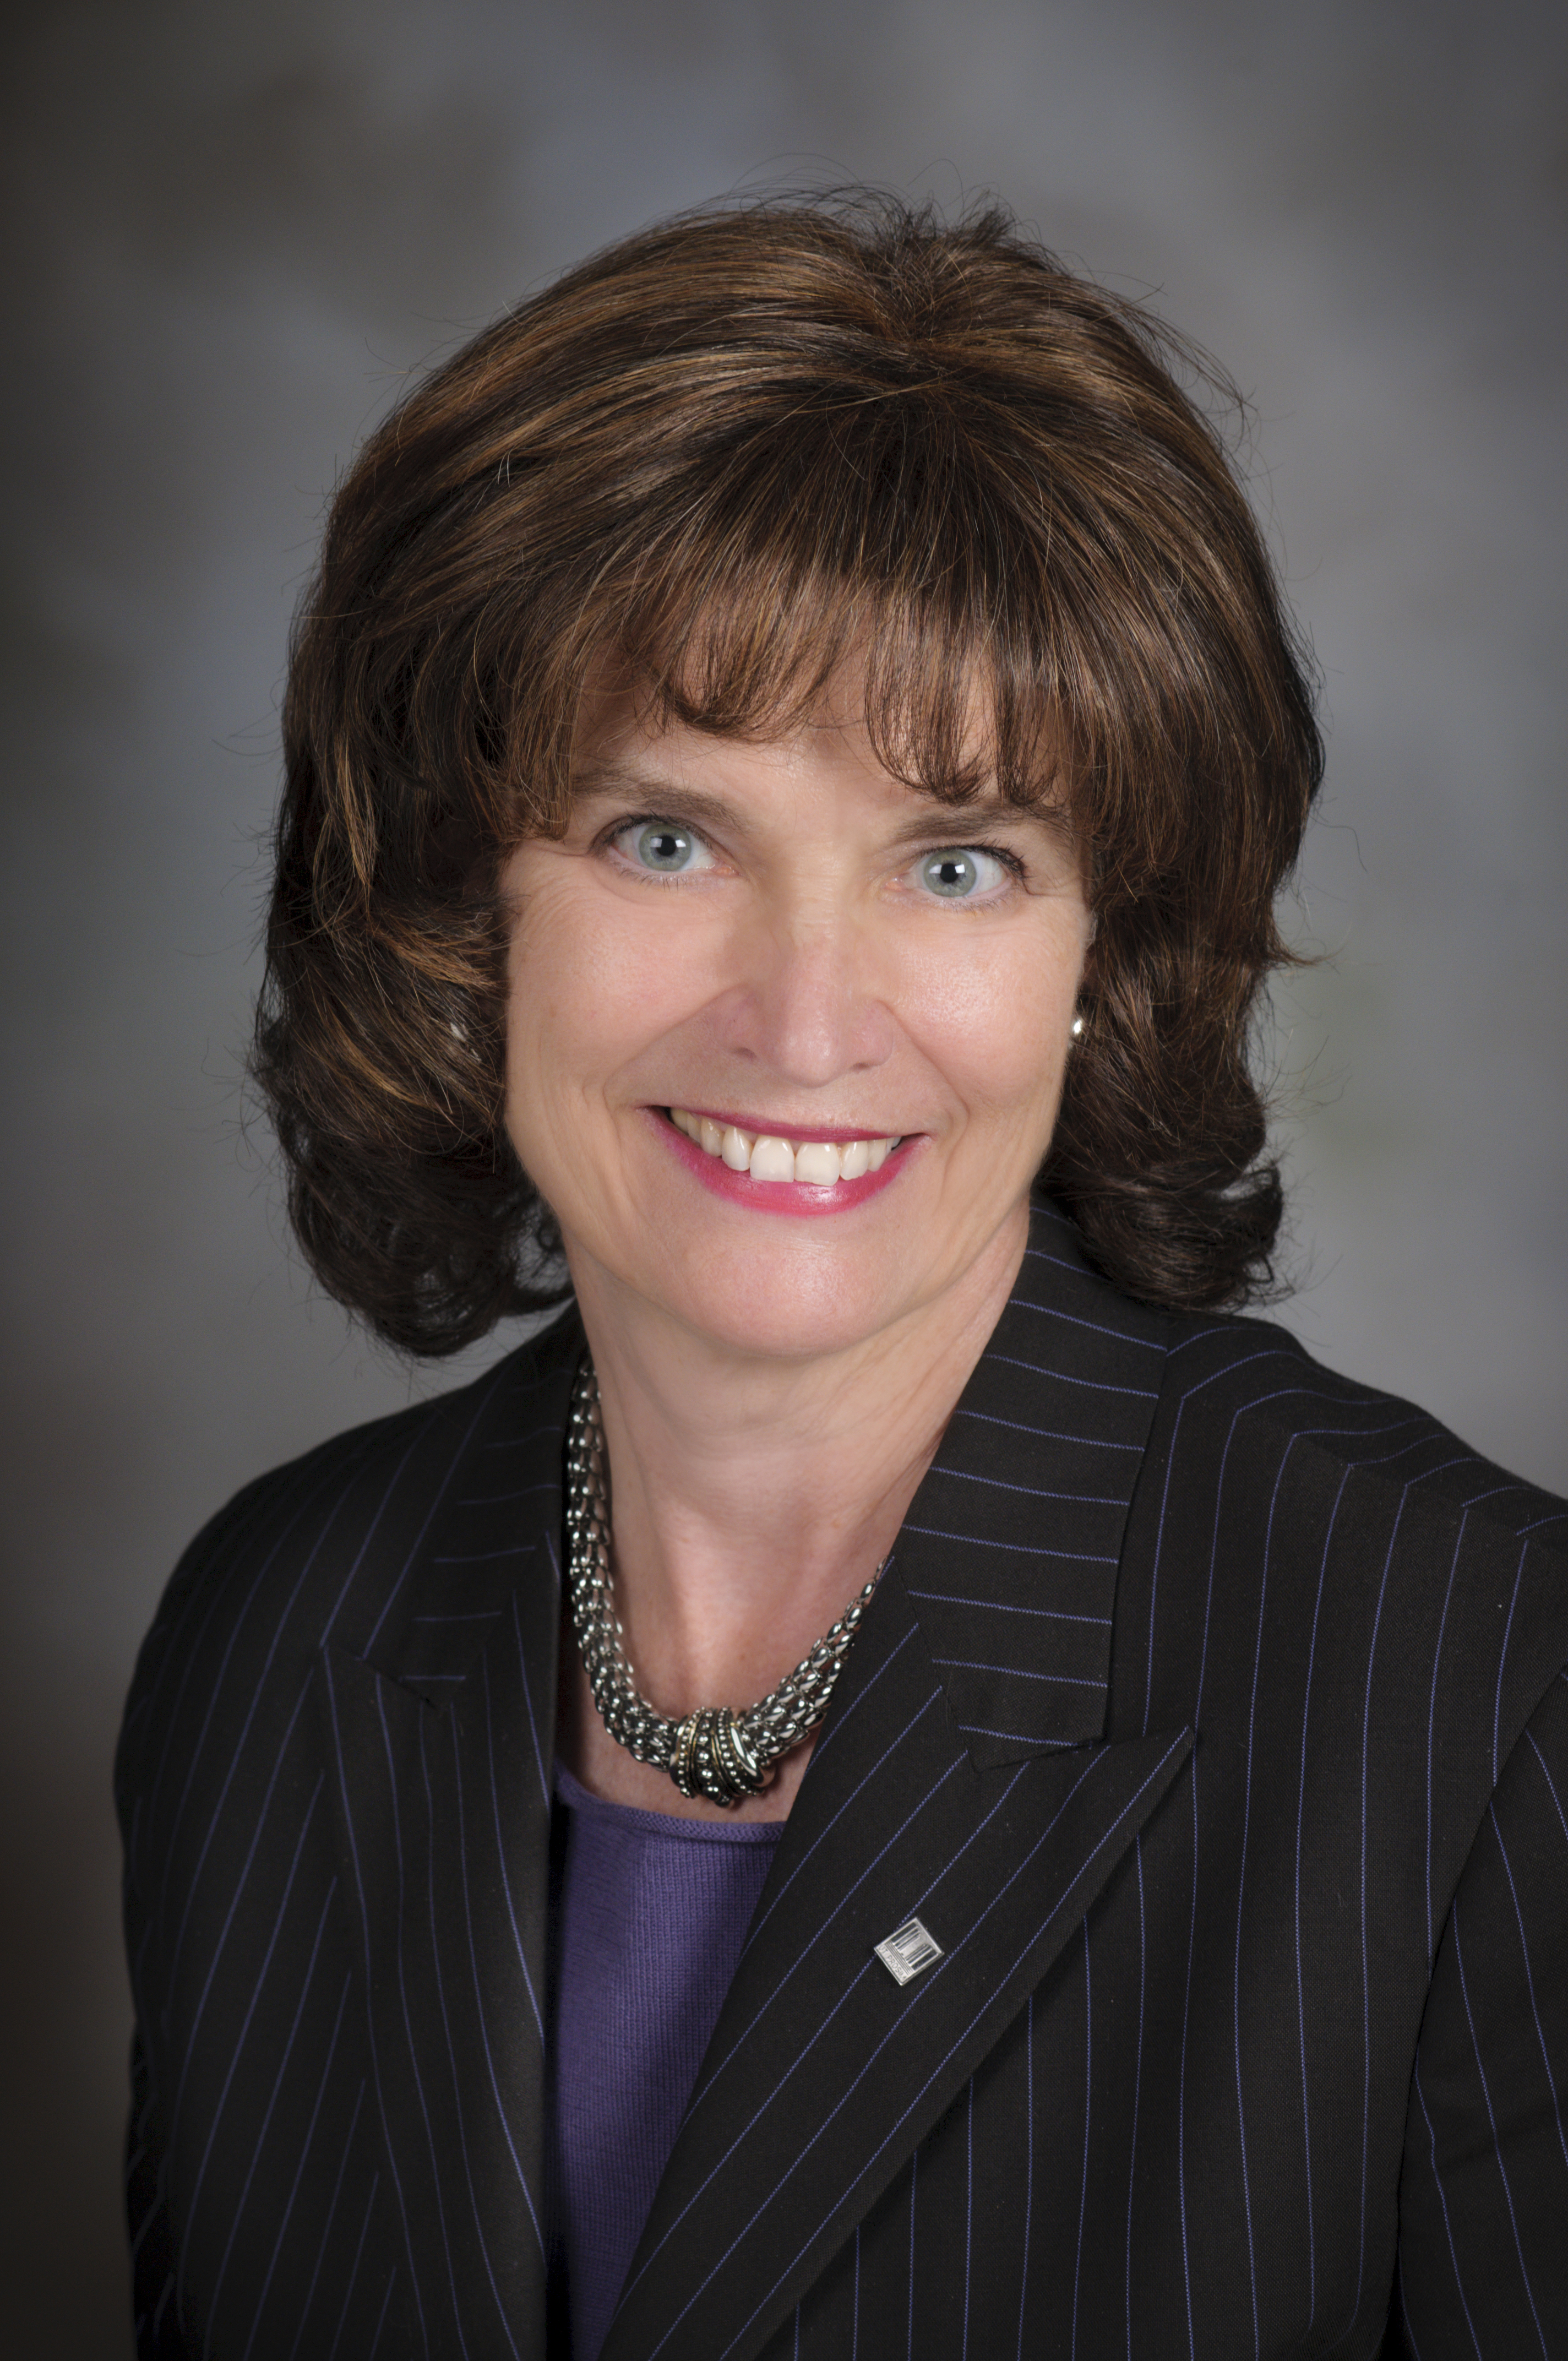 Photograph of Virginia Tech Vice President for Development and University Relations Elizabeth A. "Betsy" Flanagan